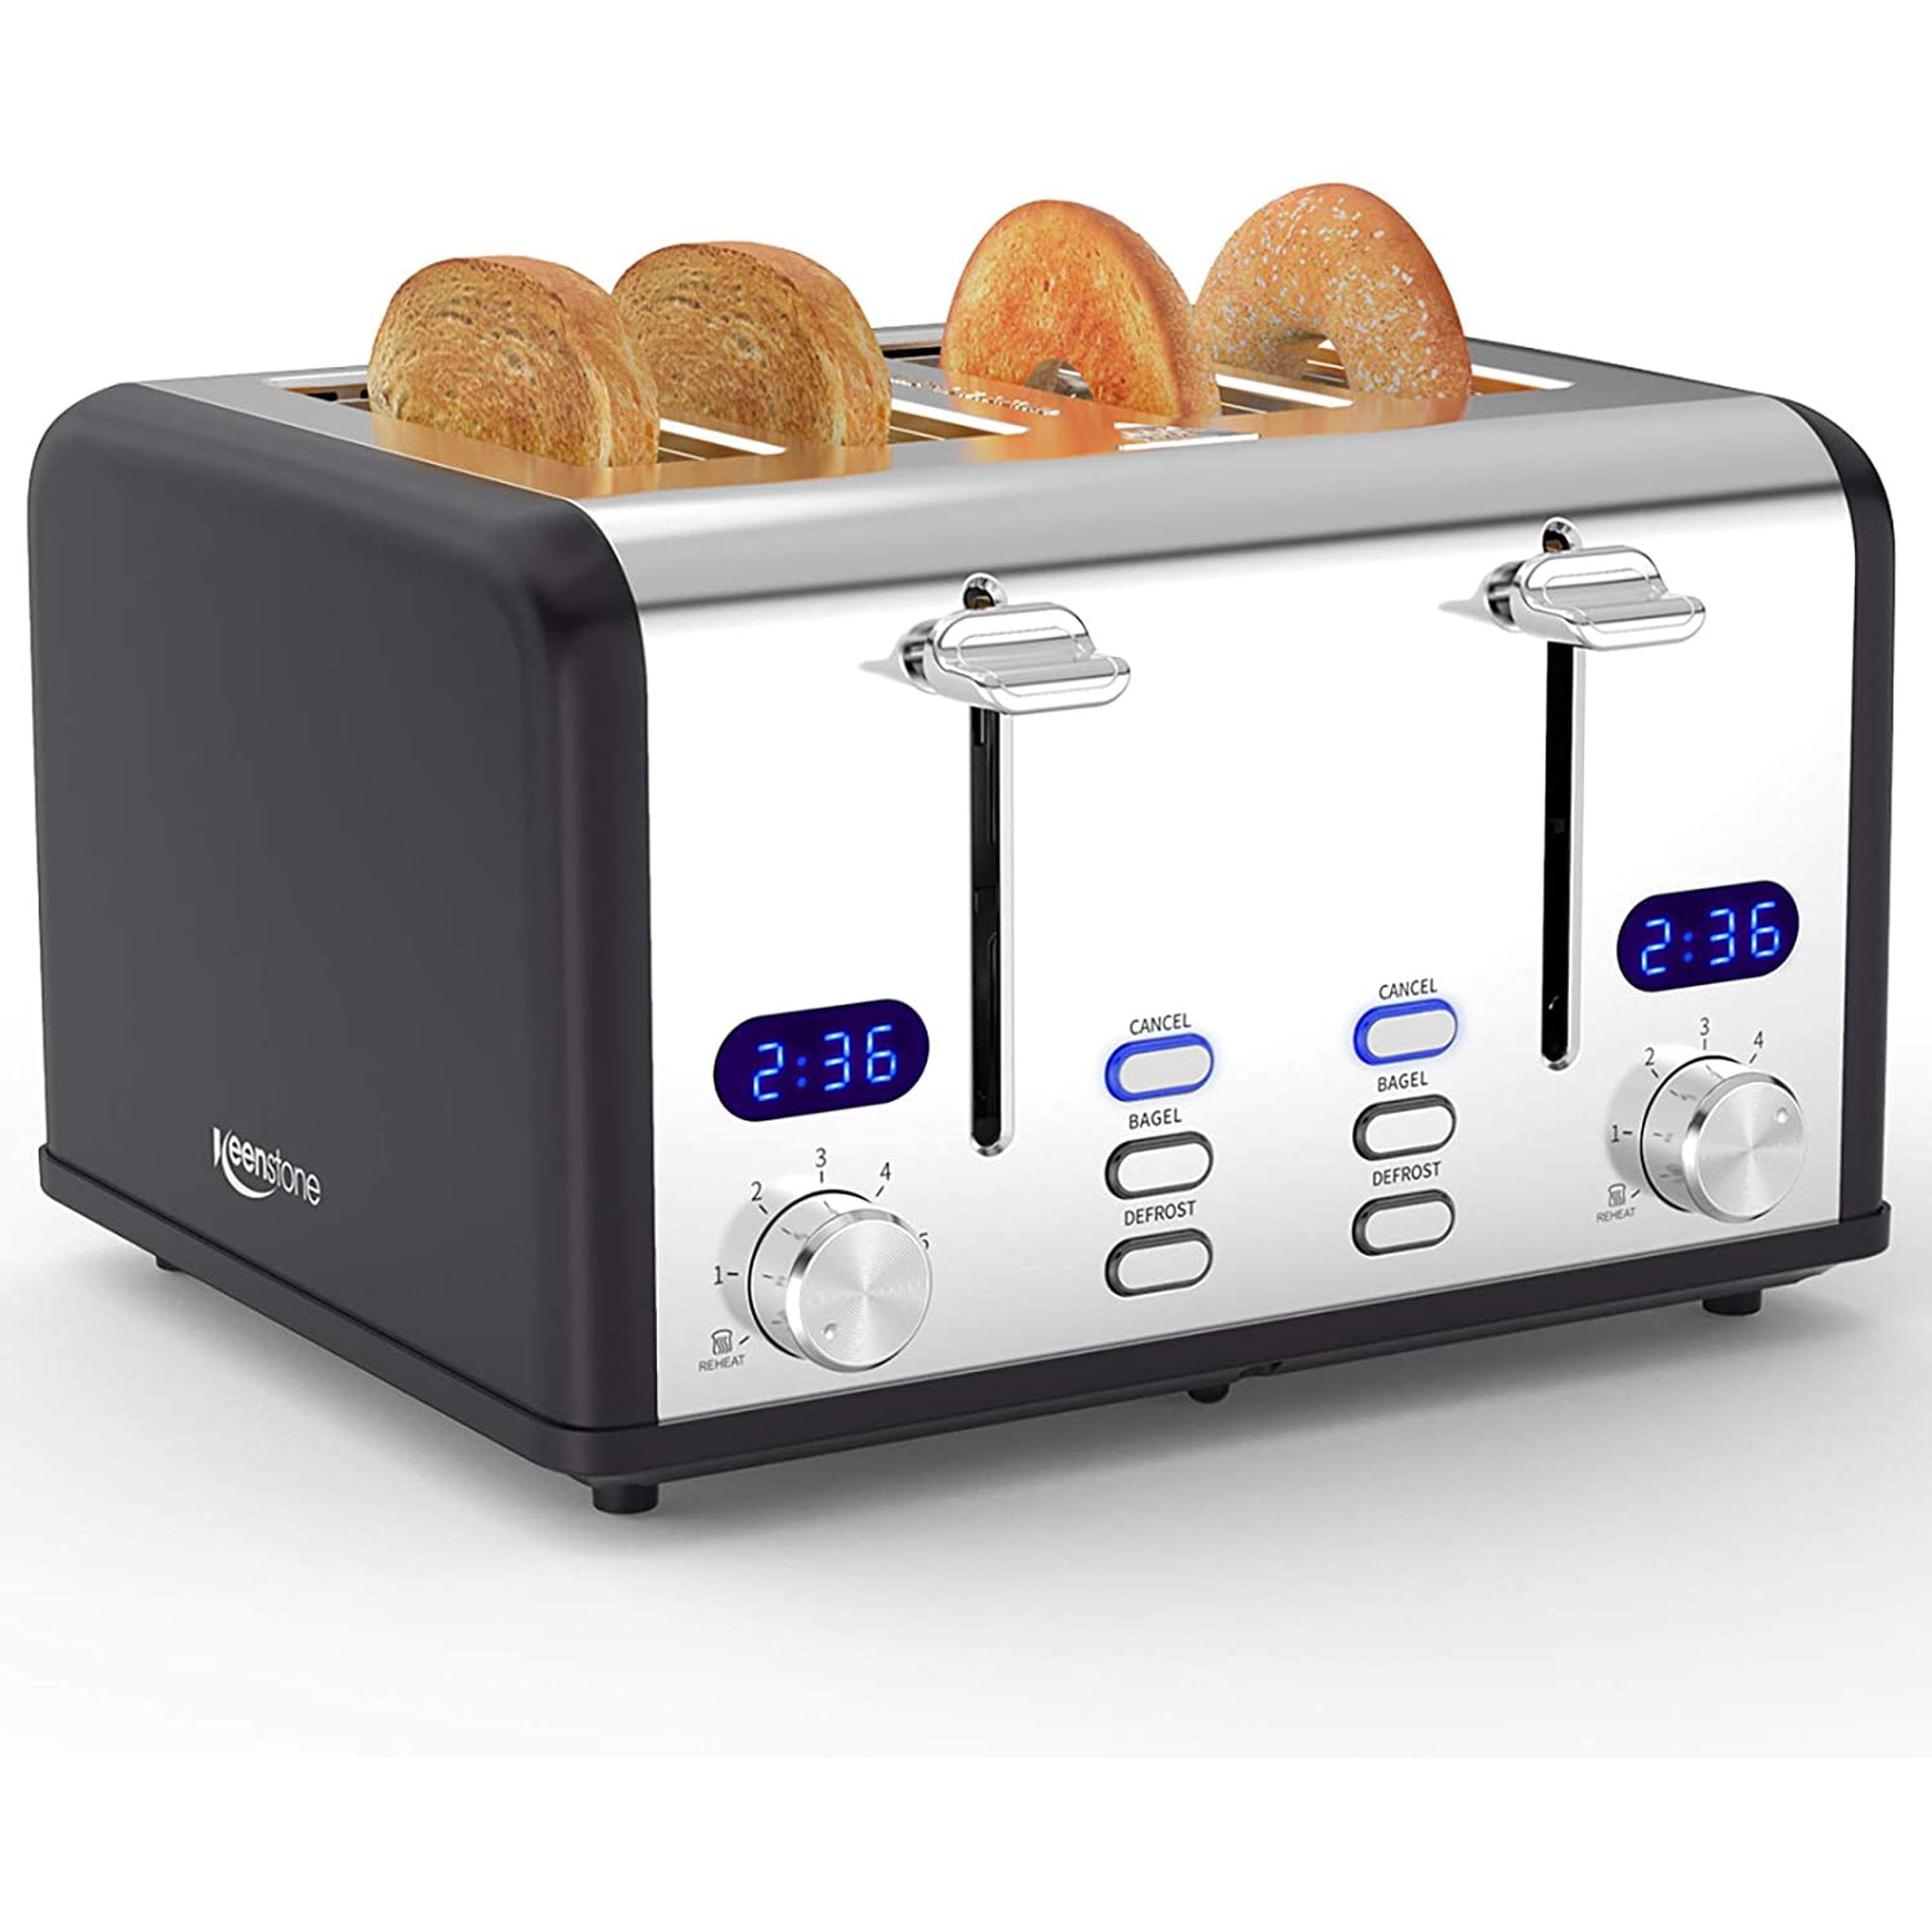 Toaster 2 Slice Stainless 2 Slice Toaster Best Rated Prime Wide Slot Toaster with Removable Crumb Tray 7 Bread Shade Settings Cancel Function Defrost Y-Blue Bagel 